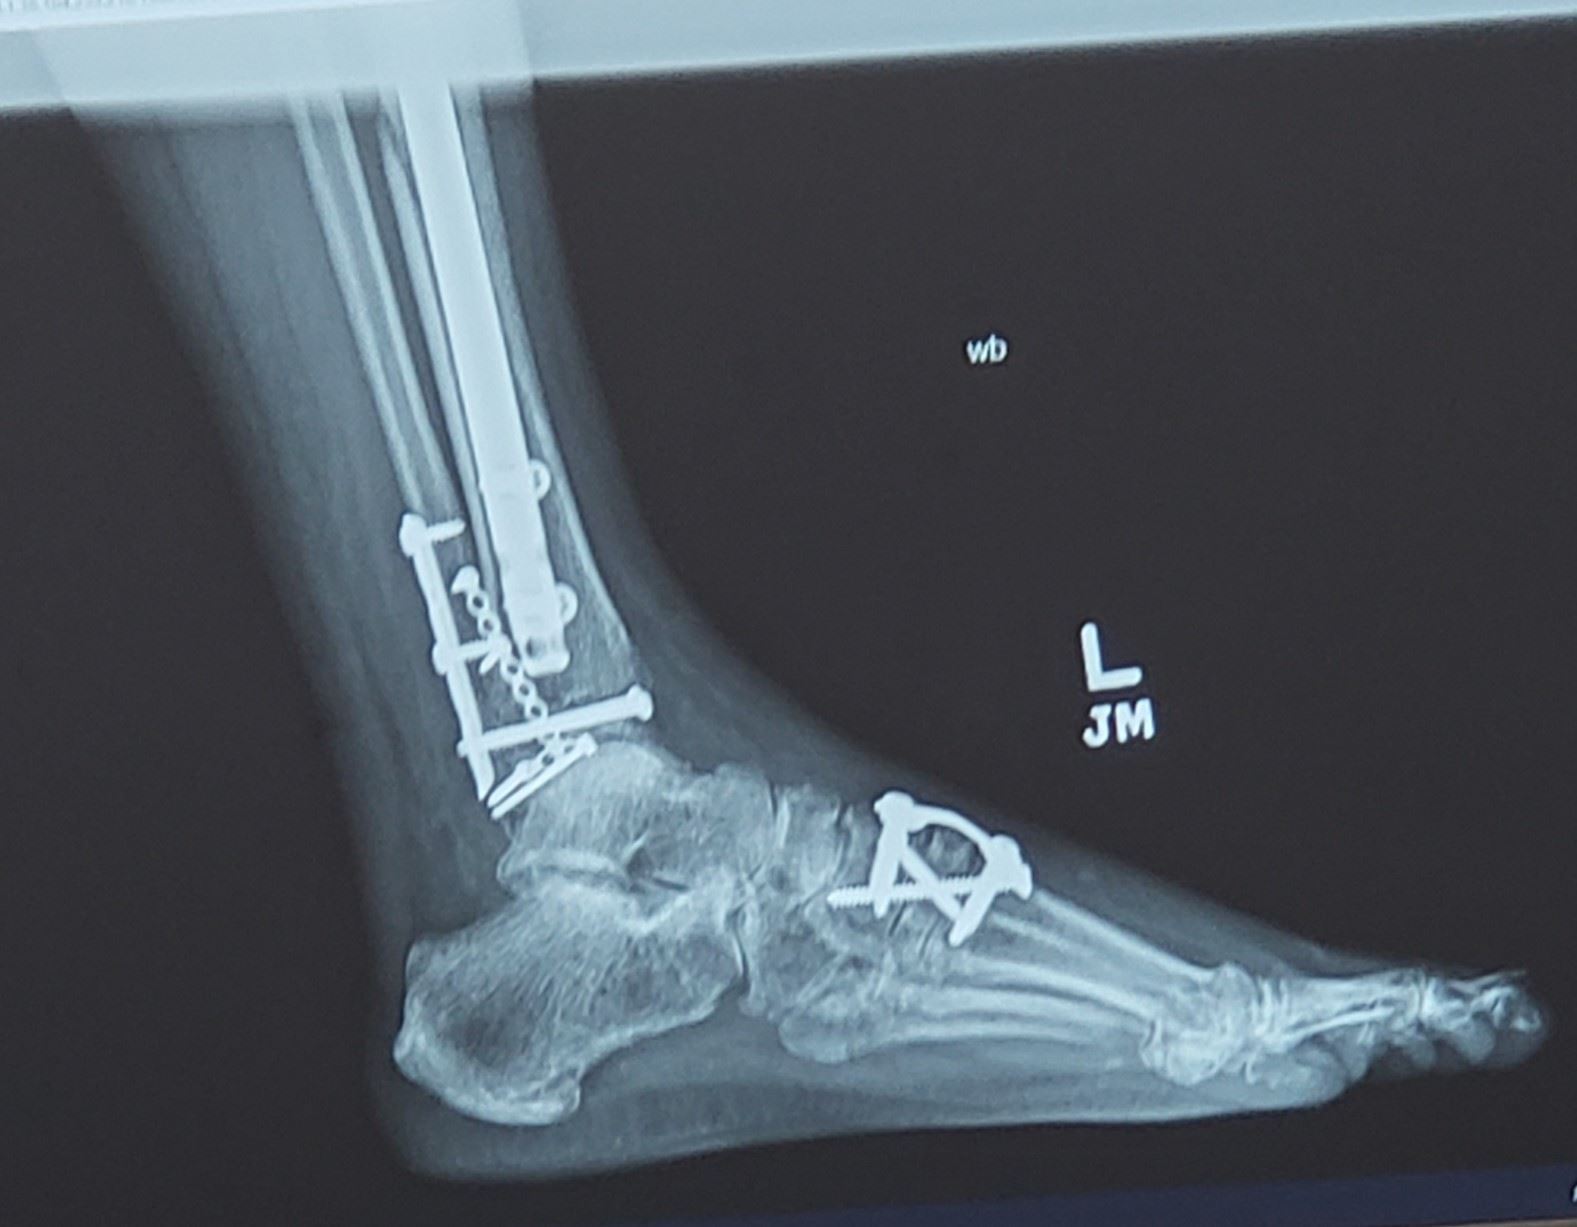 X-ray of patient's foot with screws and hardware